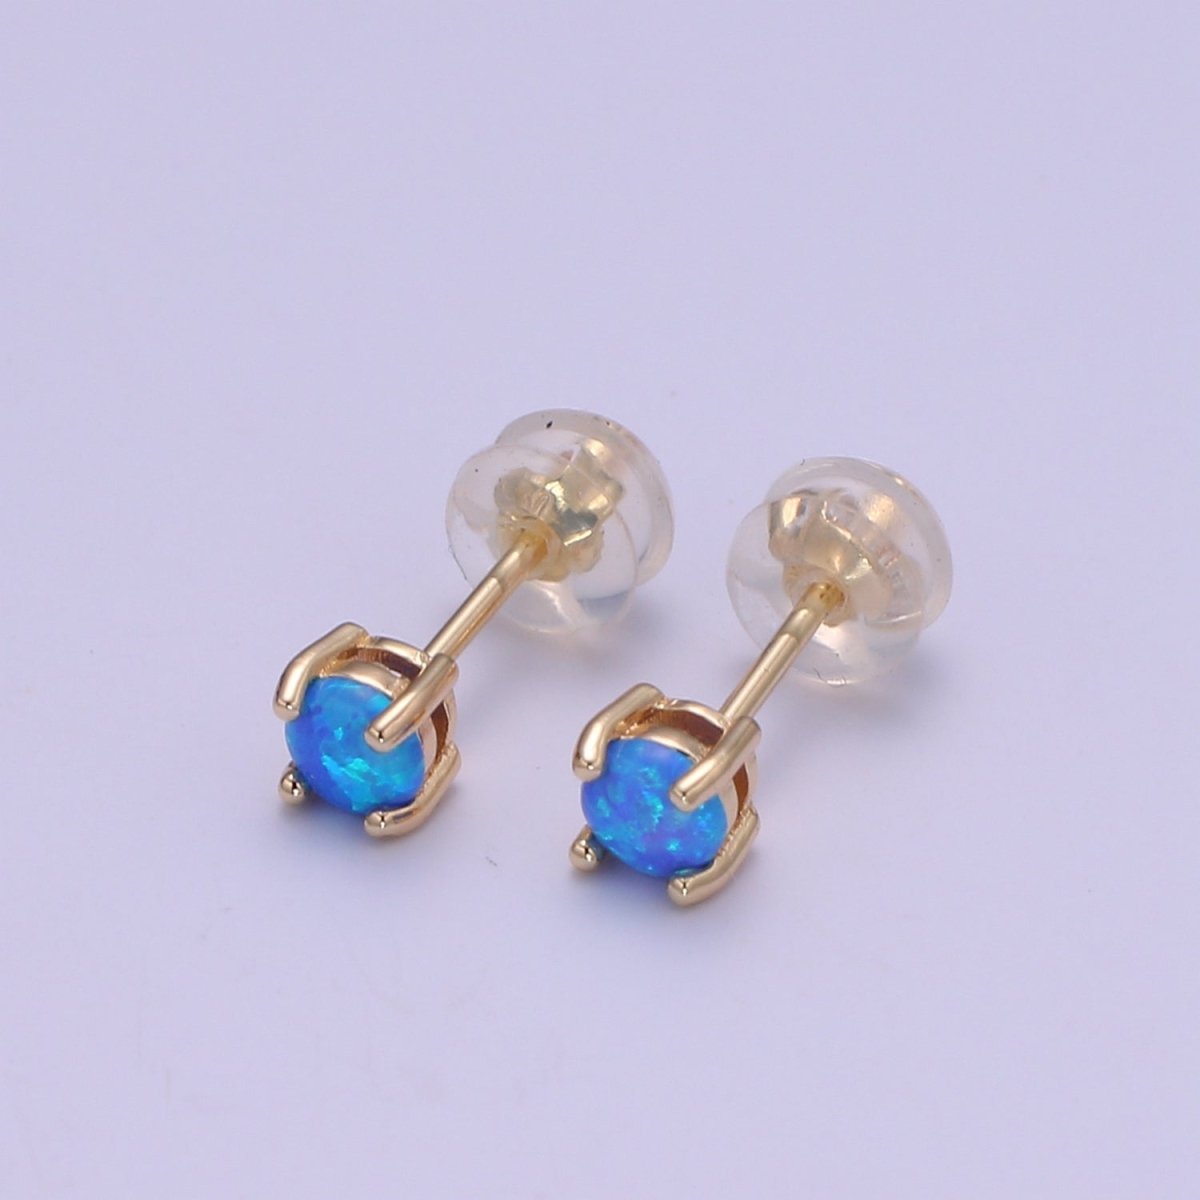 Minimalist Opal Stud Earrings in 18k Gold Filled Earring Pink Blue White Opal, Tiny Circle Dot Jewelry Dainty Stud Earring for gift P-073~P-075 - DLUXCA